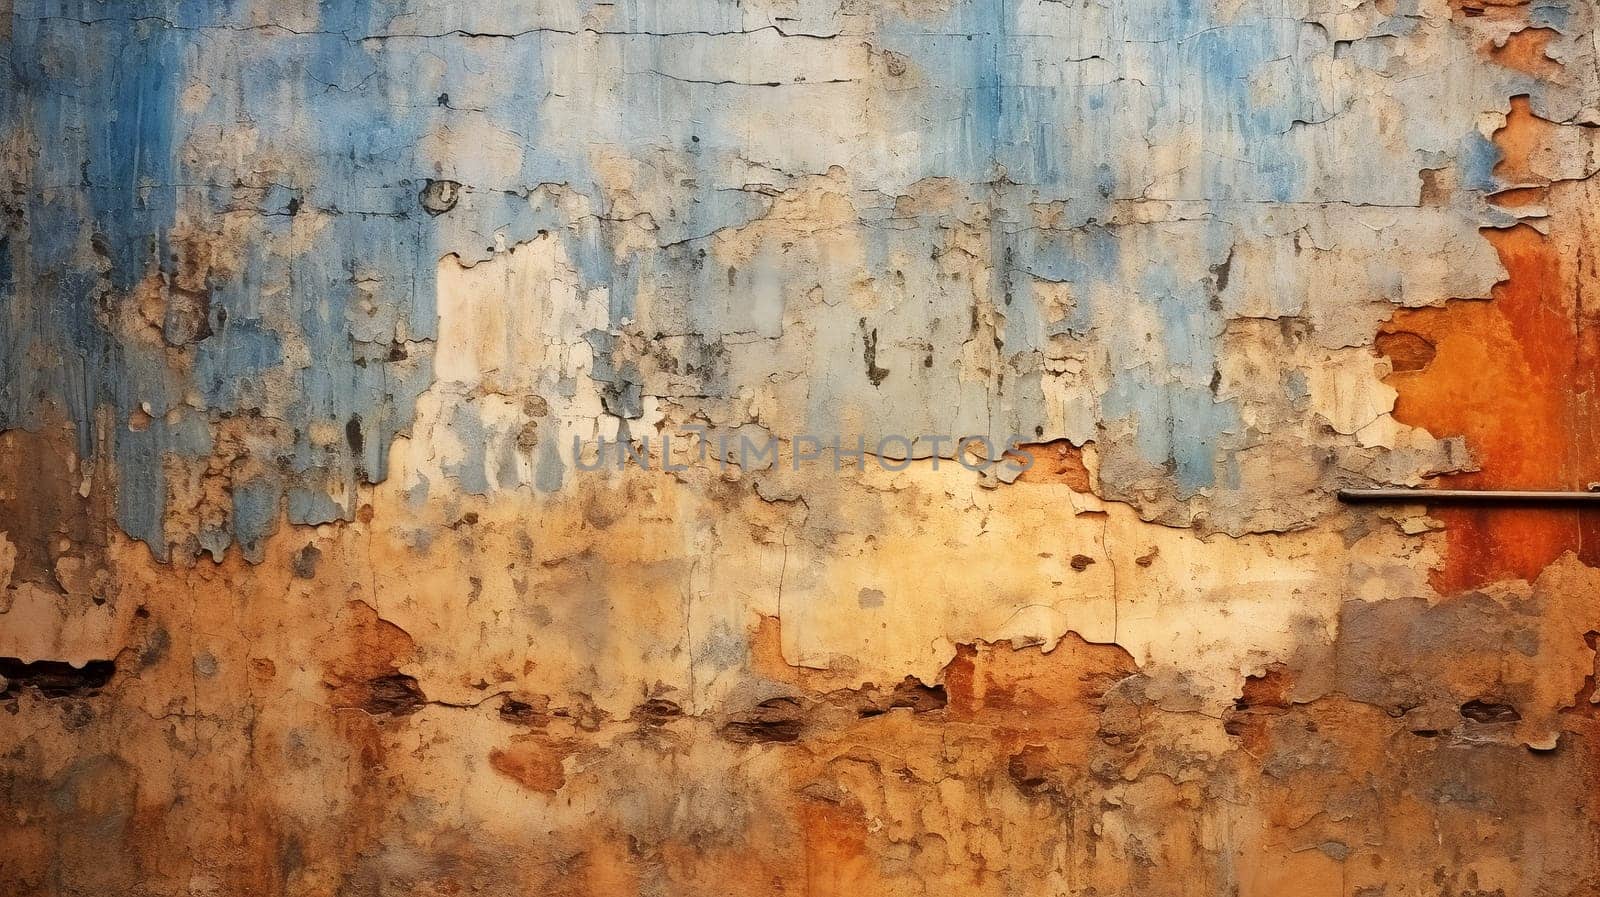 Aged blue and orange peeling wall texture by chrisroll